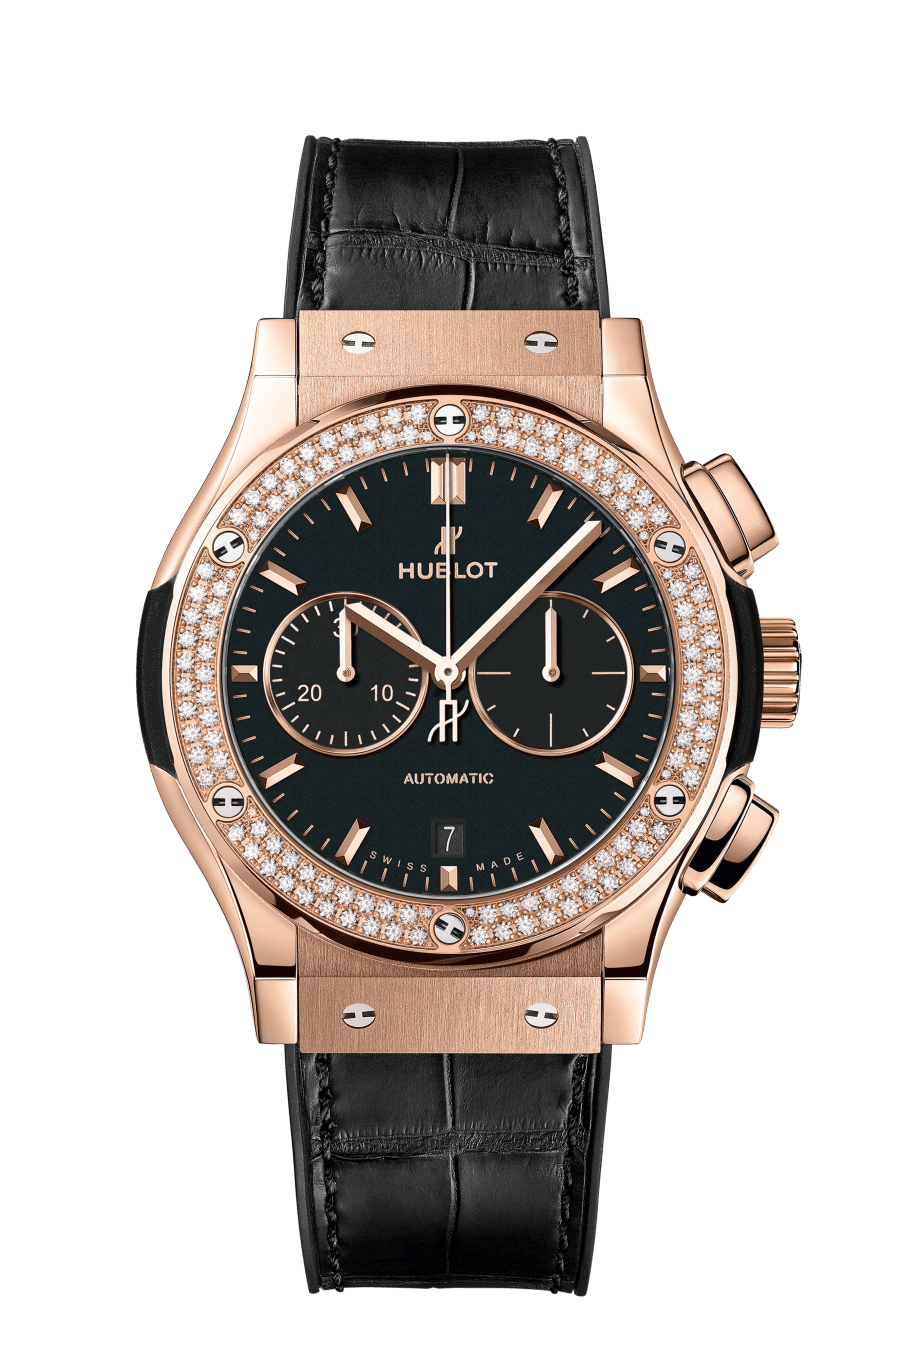 Hublot Classic Fusion Chronograph in Rose Gold with Diamond Bezel 42mm